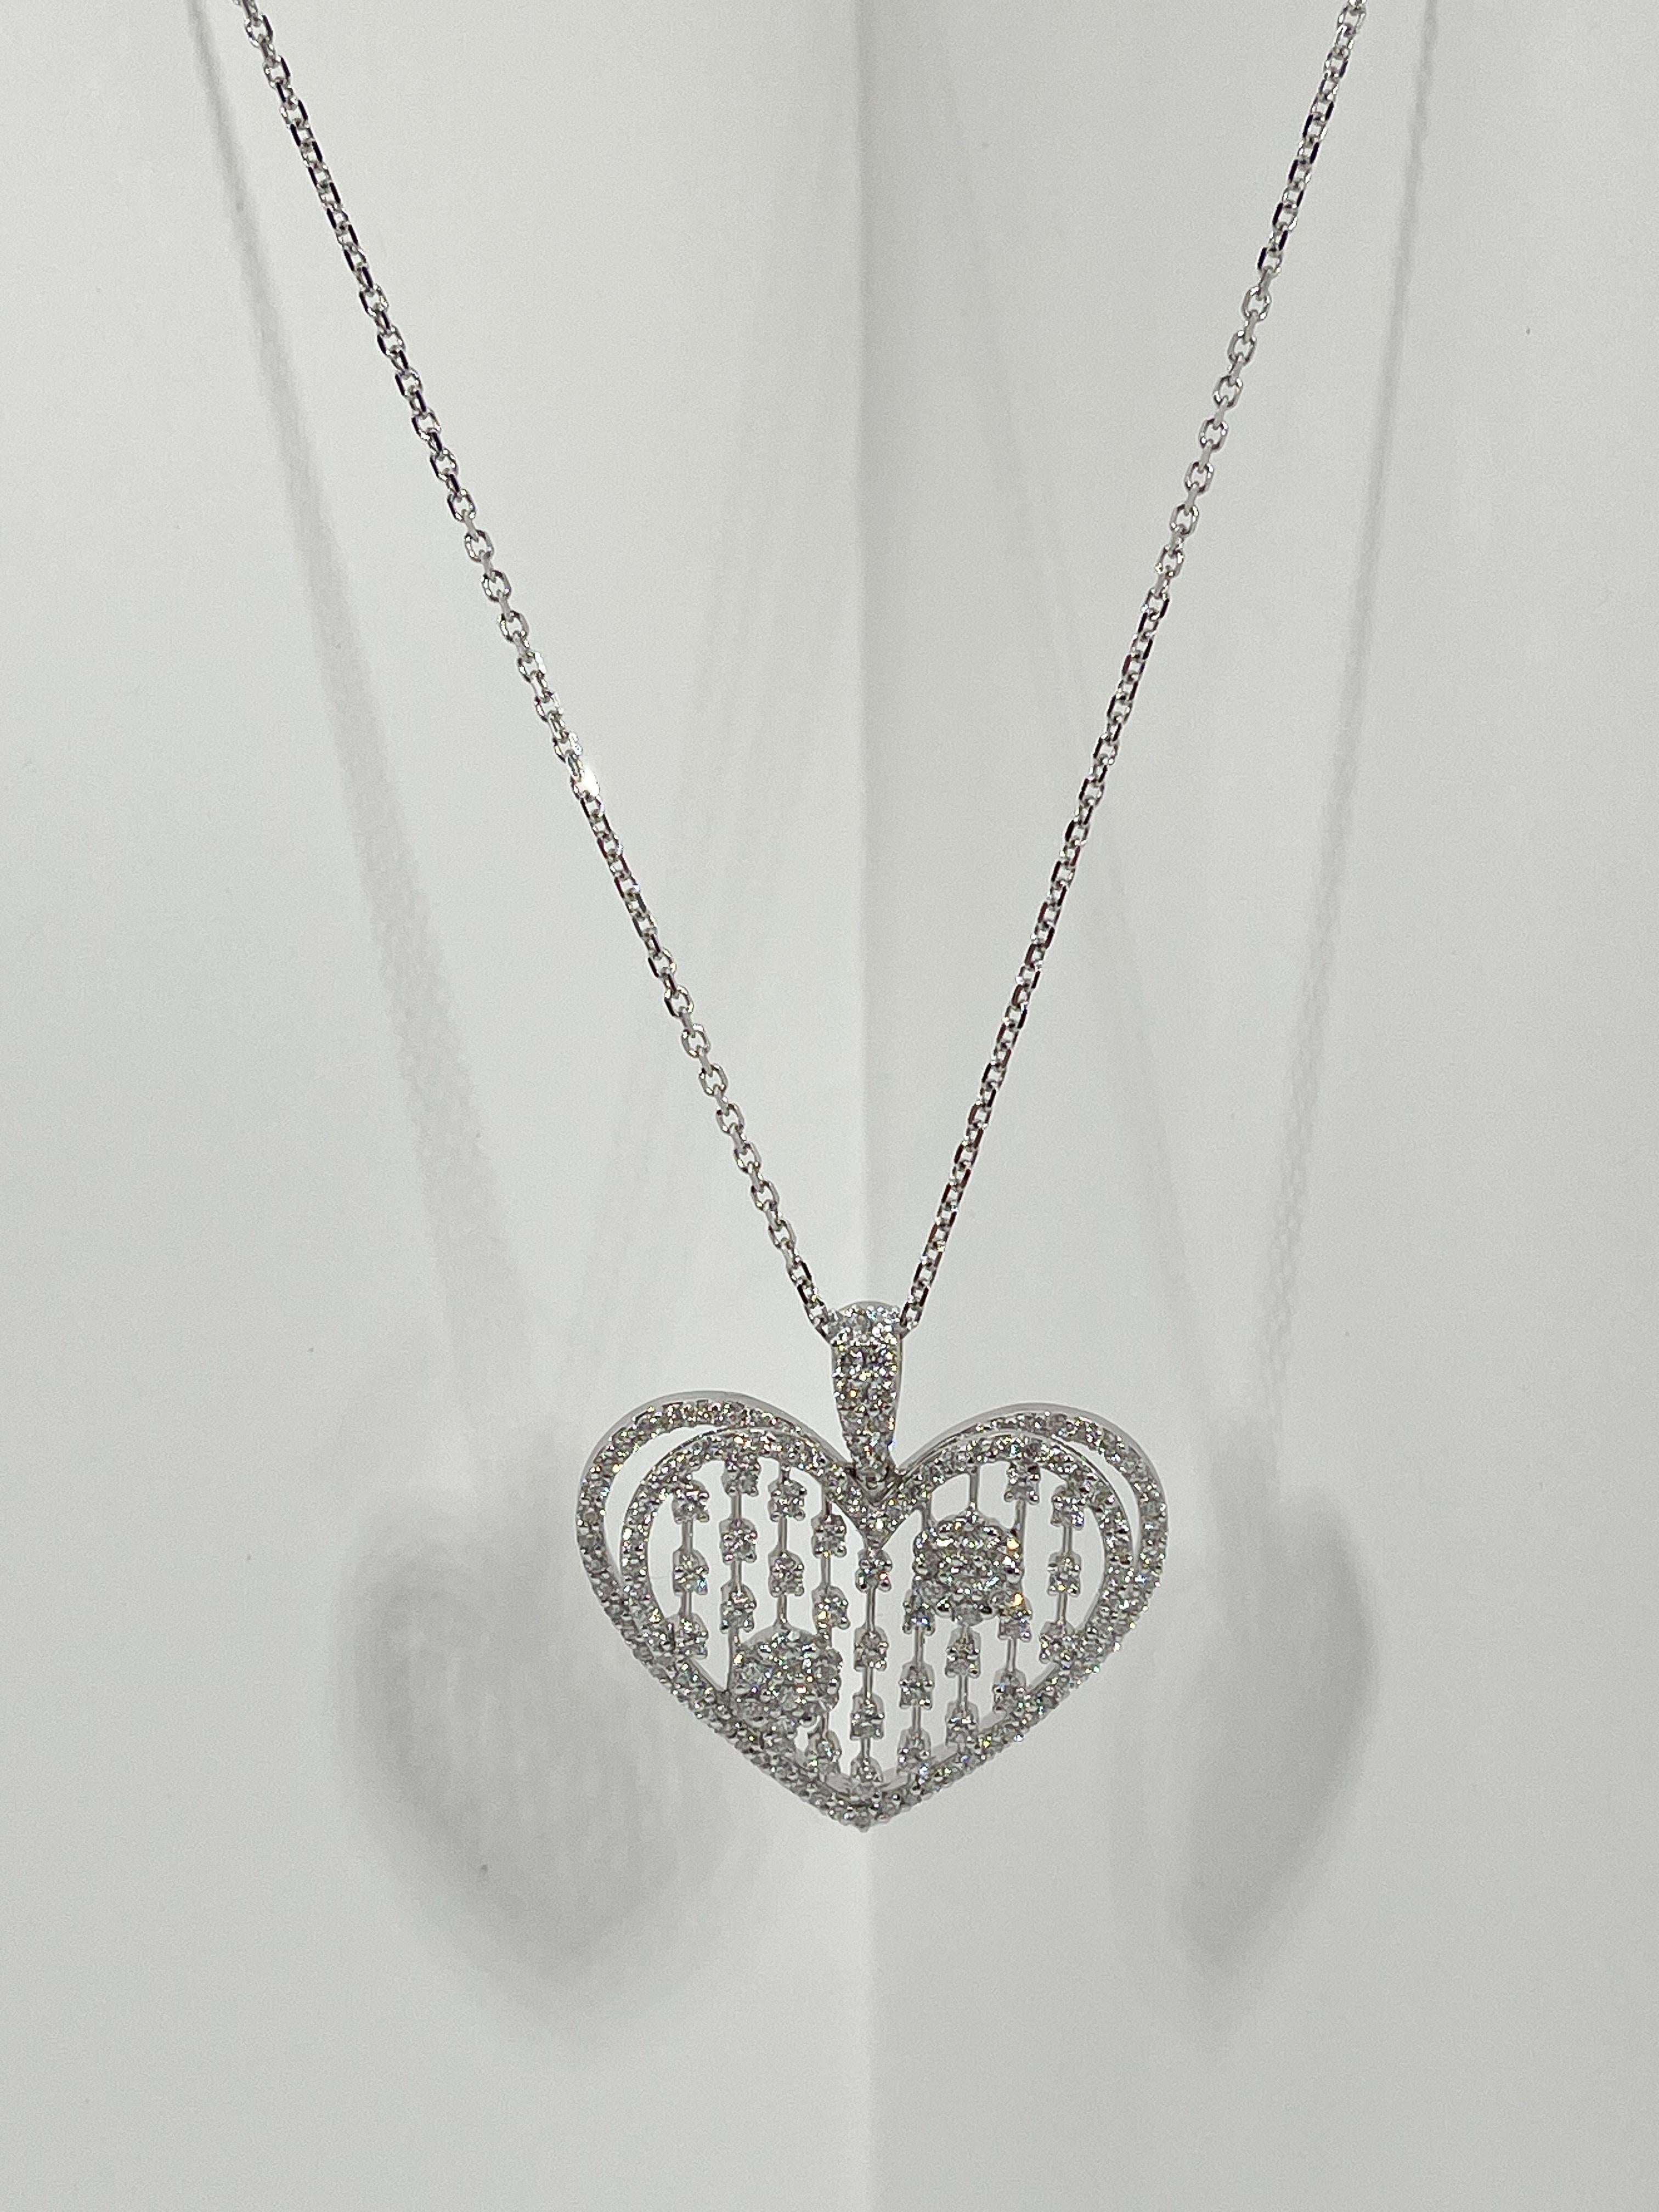 This one of a kind 18k white gold double open heart with round and princess cut diamonds has a total CTW of 3 and are vs2 G color. Necklace is 18 inches in length and the pendant measures 34.3 x 22.2 mm. The total weight of the necklace is 13.6